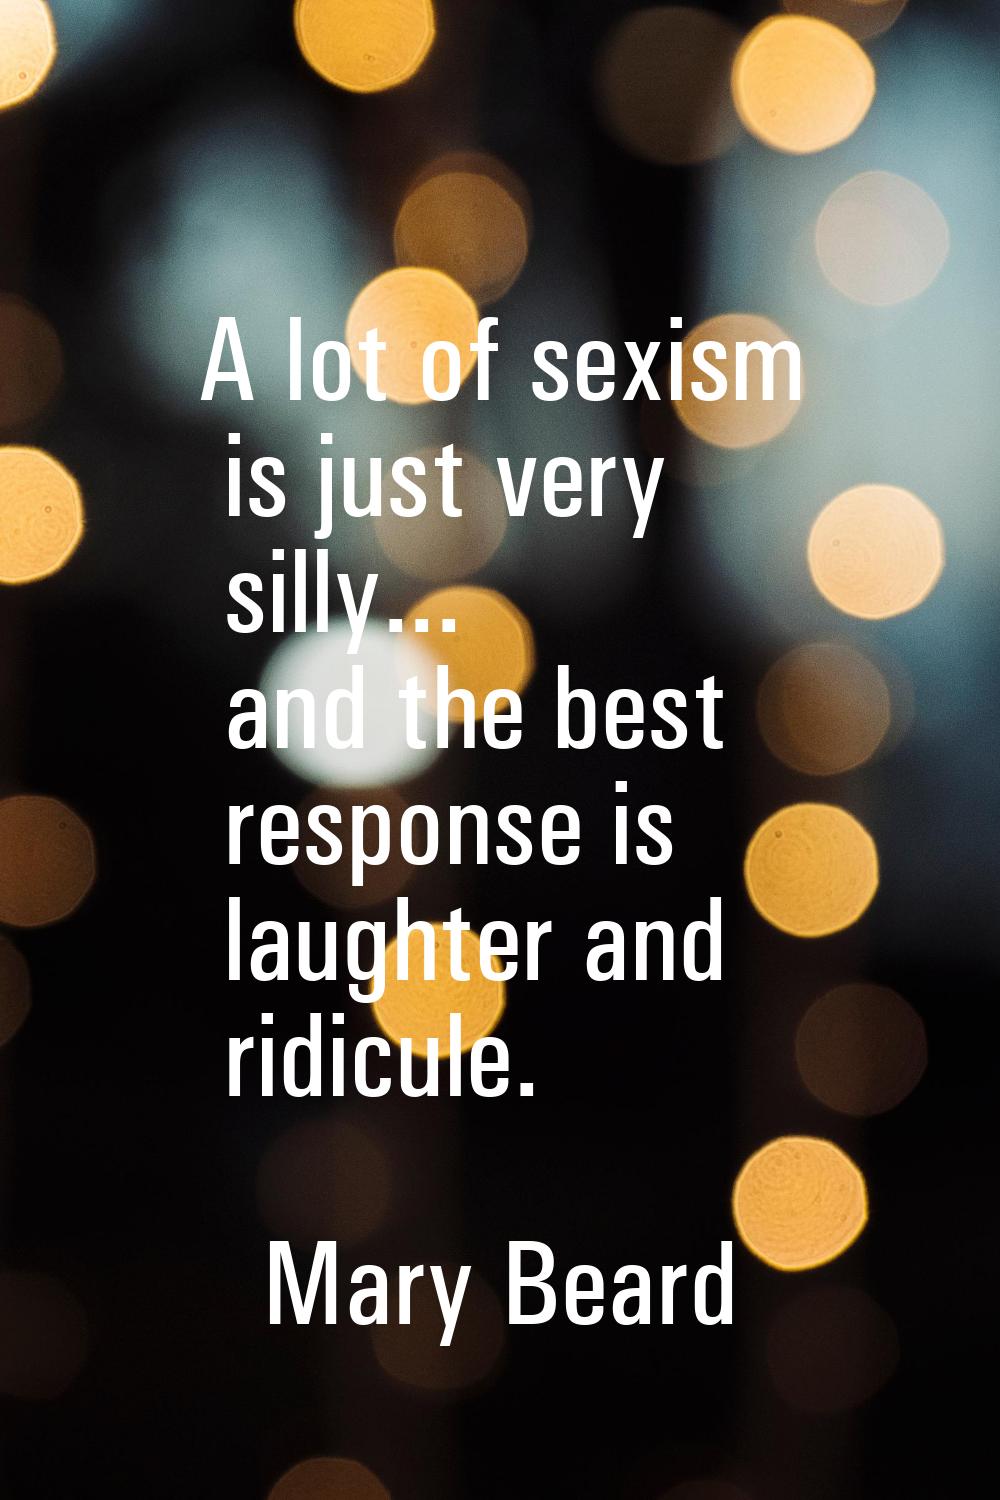 A lot of sexism is just very silly... and the best response is laughter and ridicule.